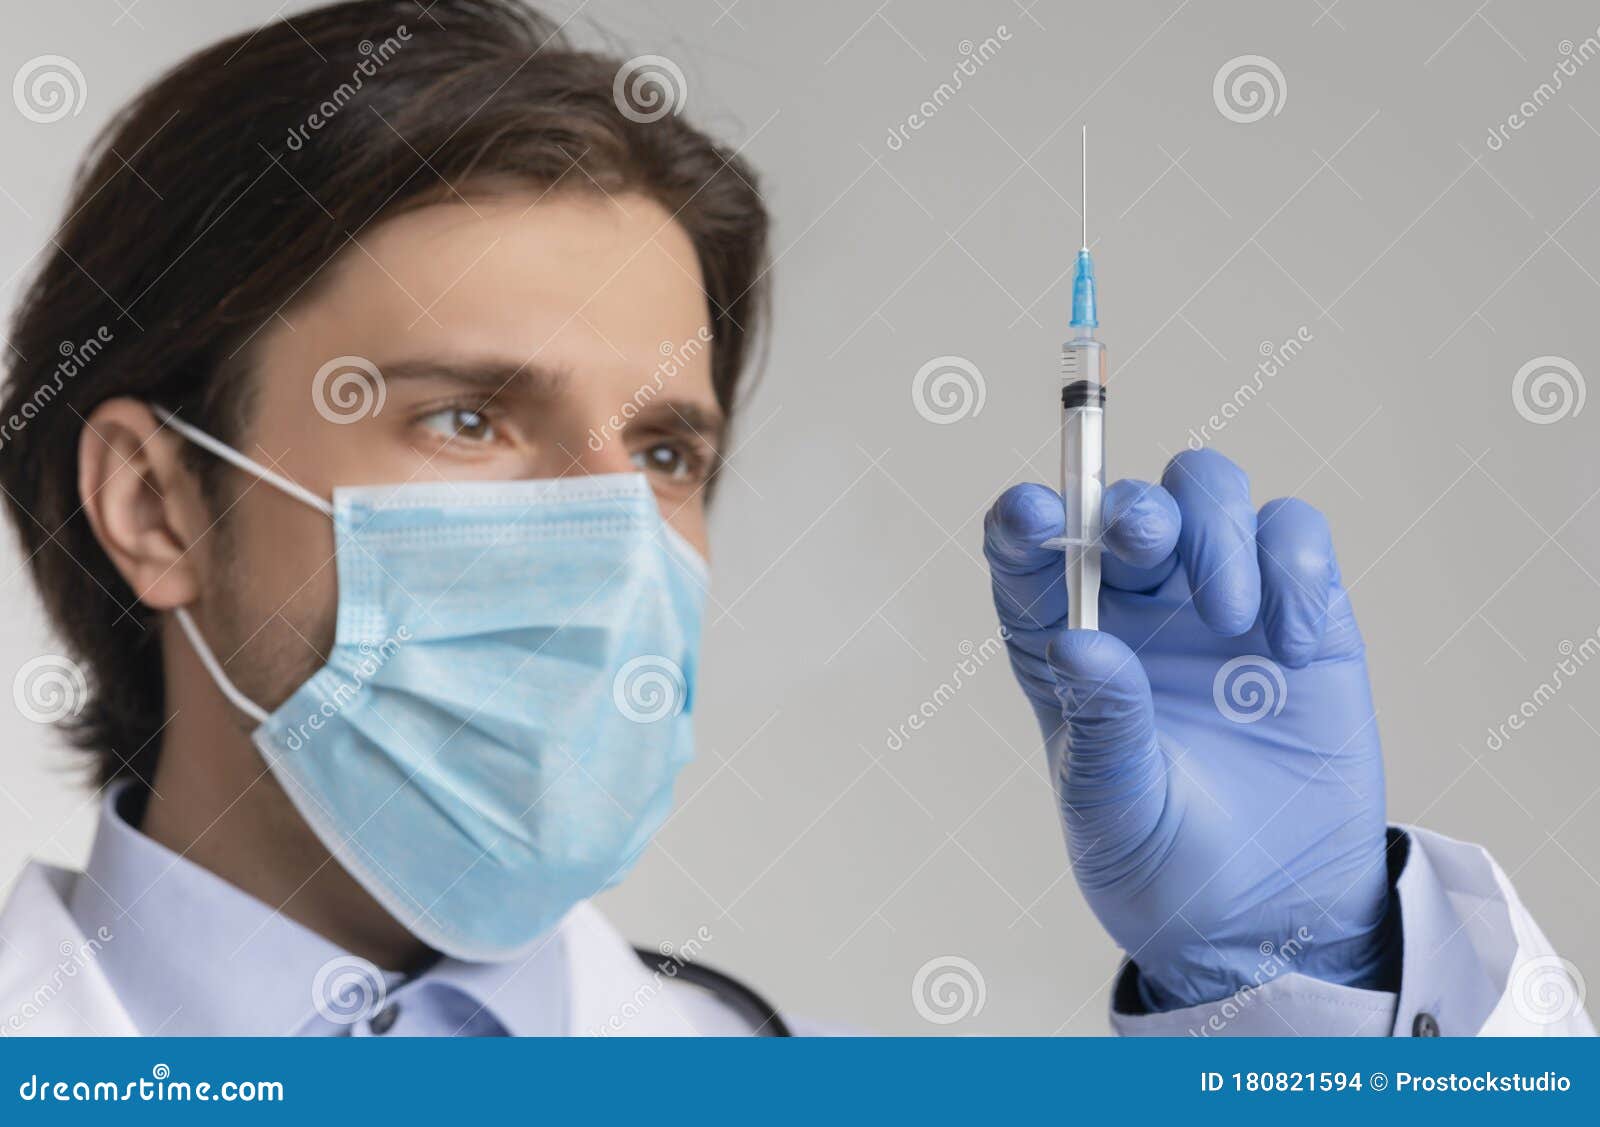 mandatory vaccination concept. closeup of male doctor holding syringe with vaccine